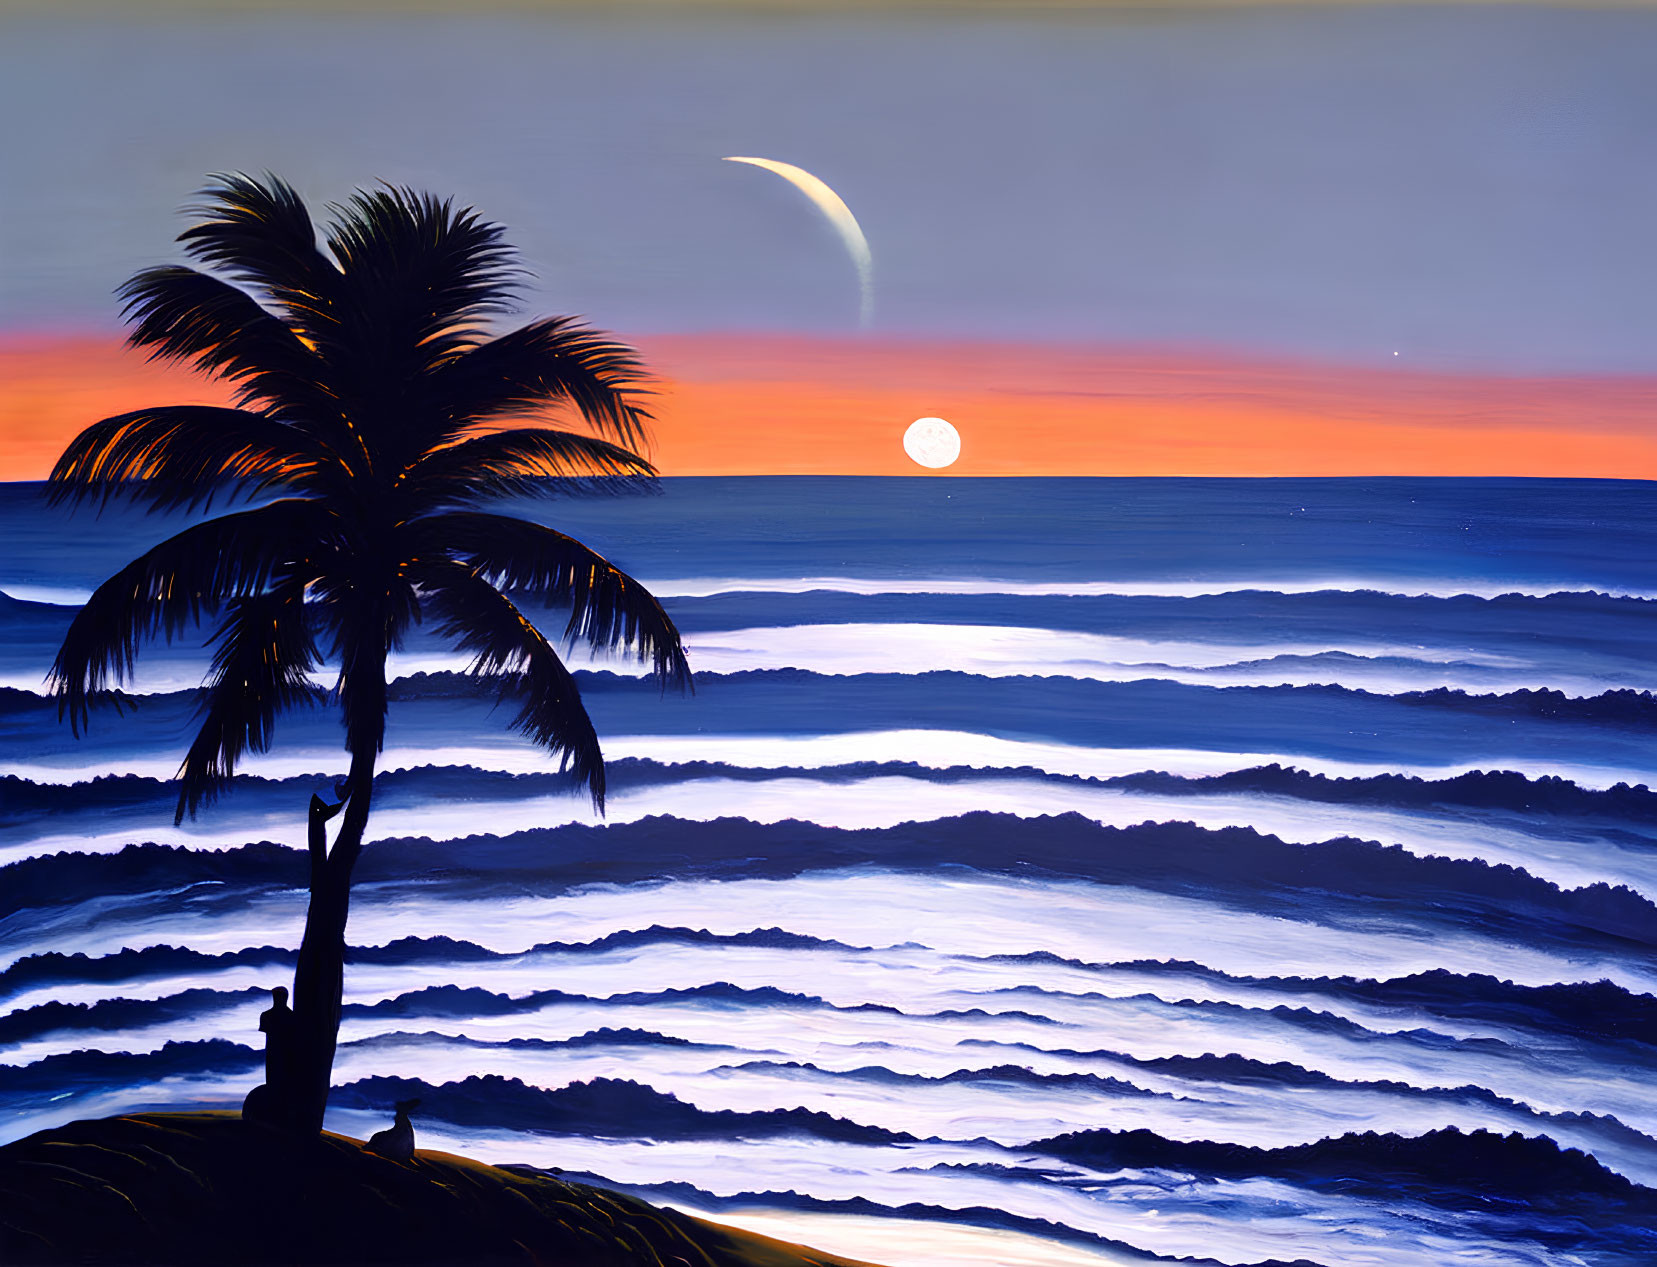 Sunset painting with crescent moon, palm tree silhouette, and layered ocean waves in blue and purple